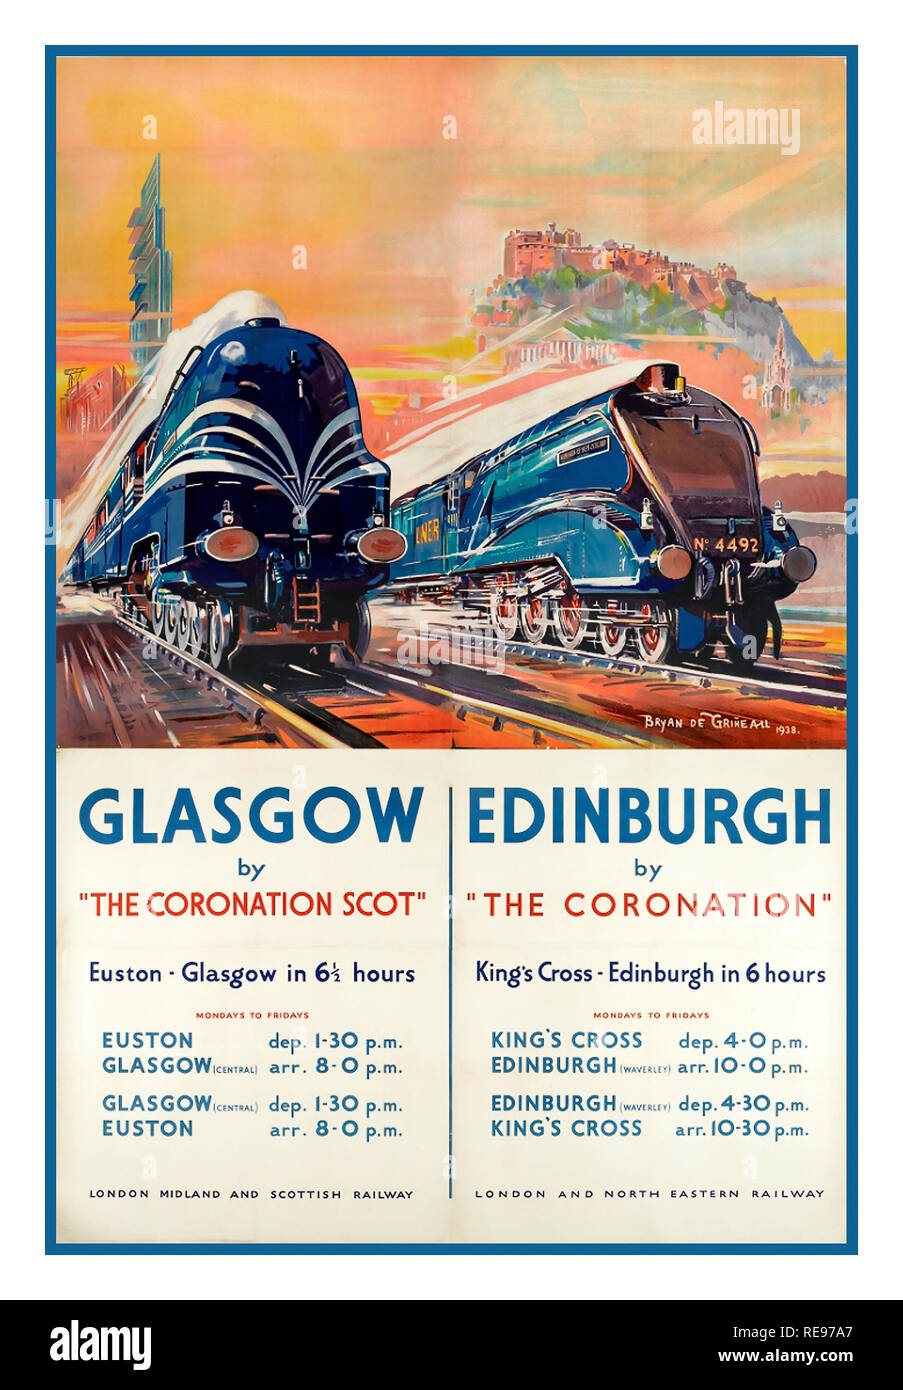 Vintage 1930's Steam Railway Poster promoting Two Rail services to London, one from Glasgow via The Coronation Scot to Euston and the other, Edinburgh via The Coronation to Kings Cross in around 6 hours Stock Photo